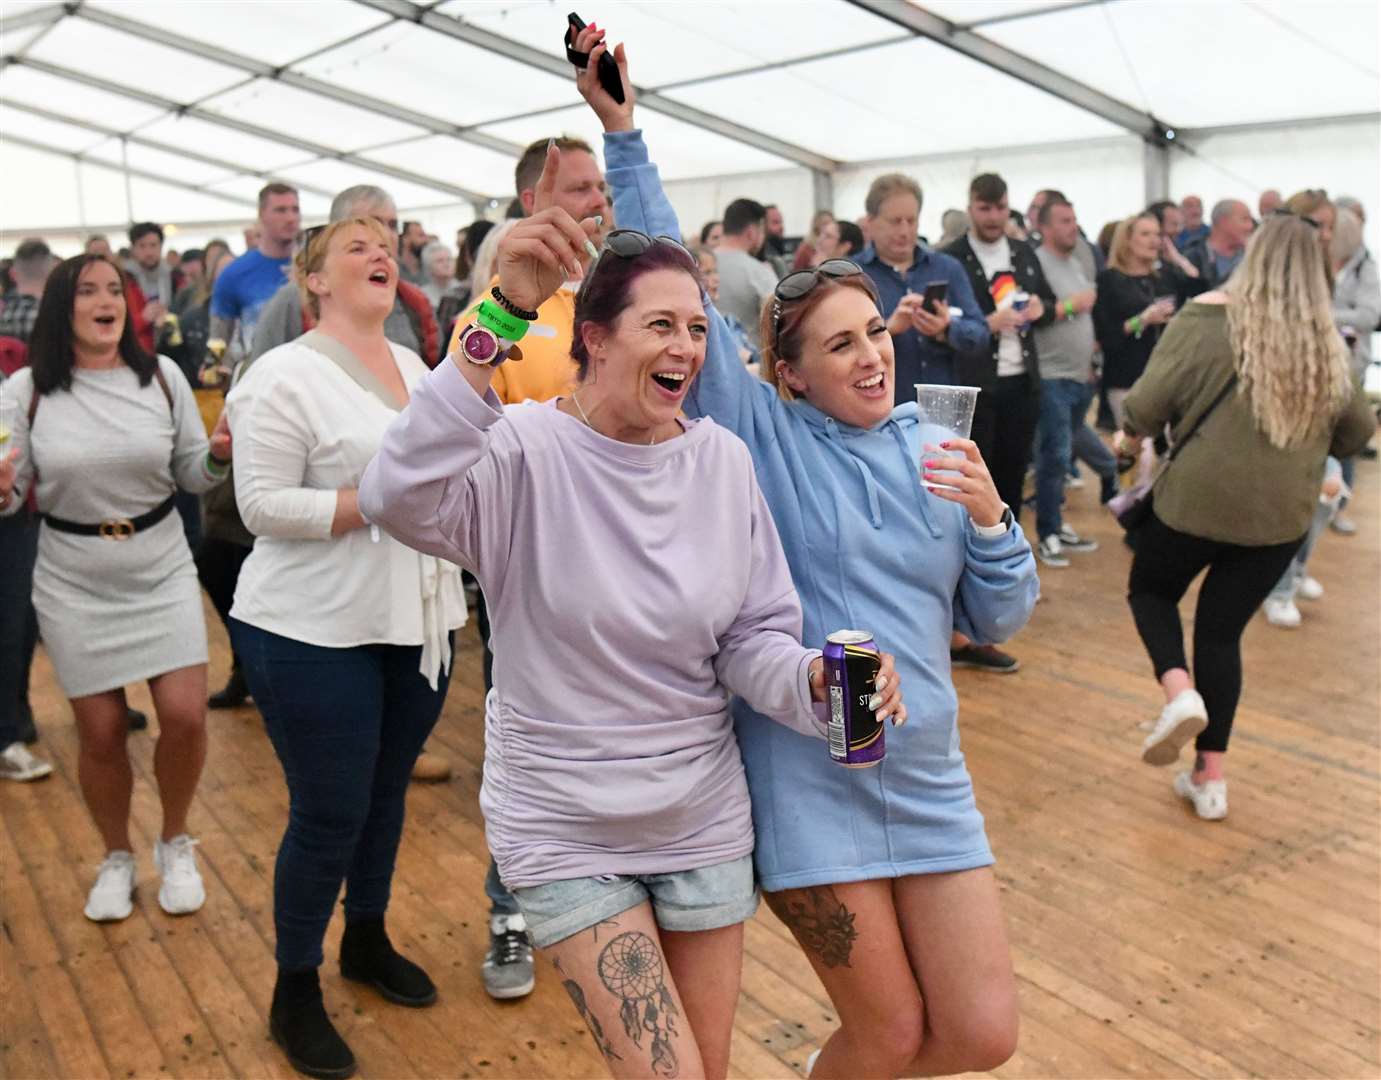 Festival-goers taking to the dance floor during last year's Tunes By the Dunes. Picture: John Wright Studio